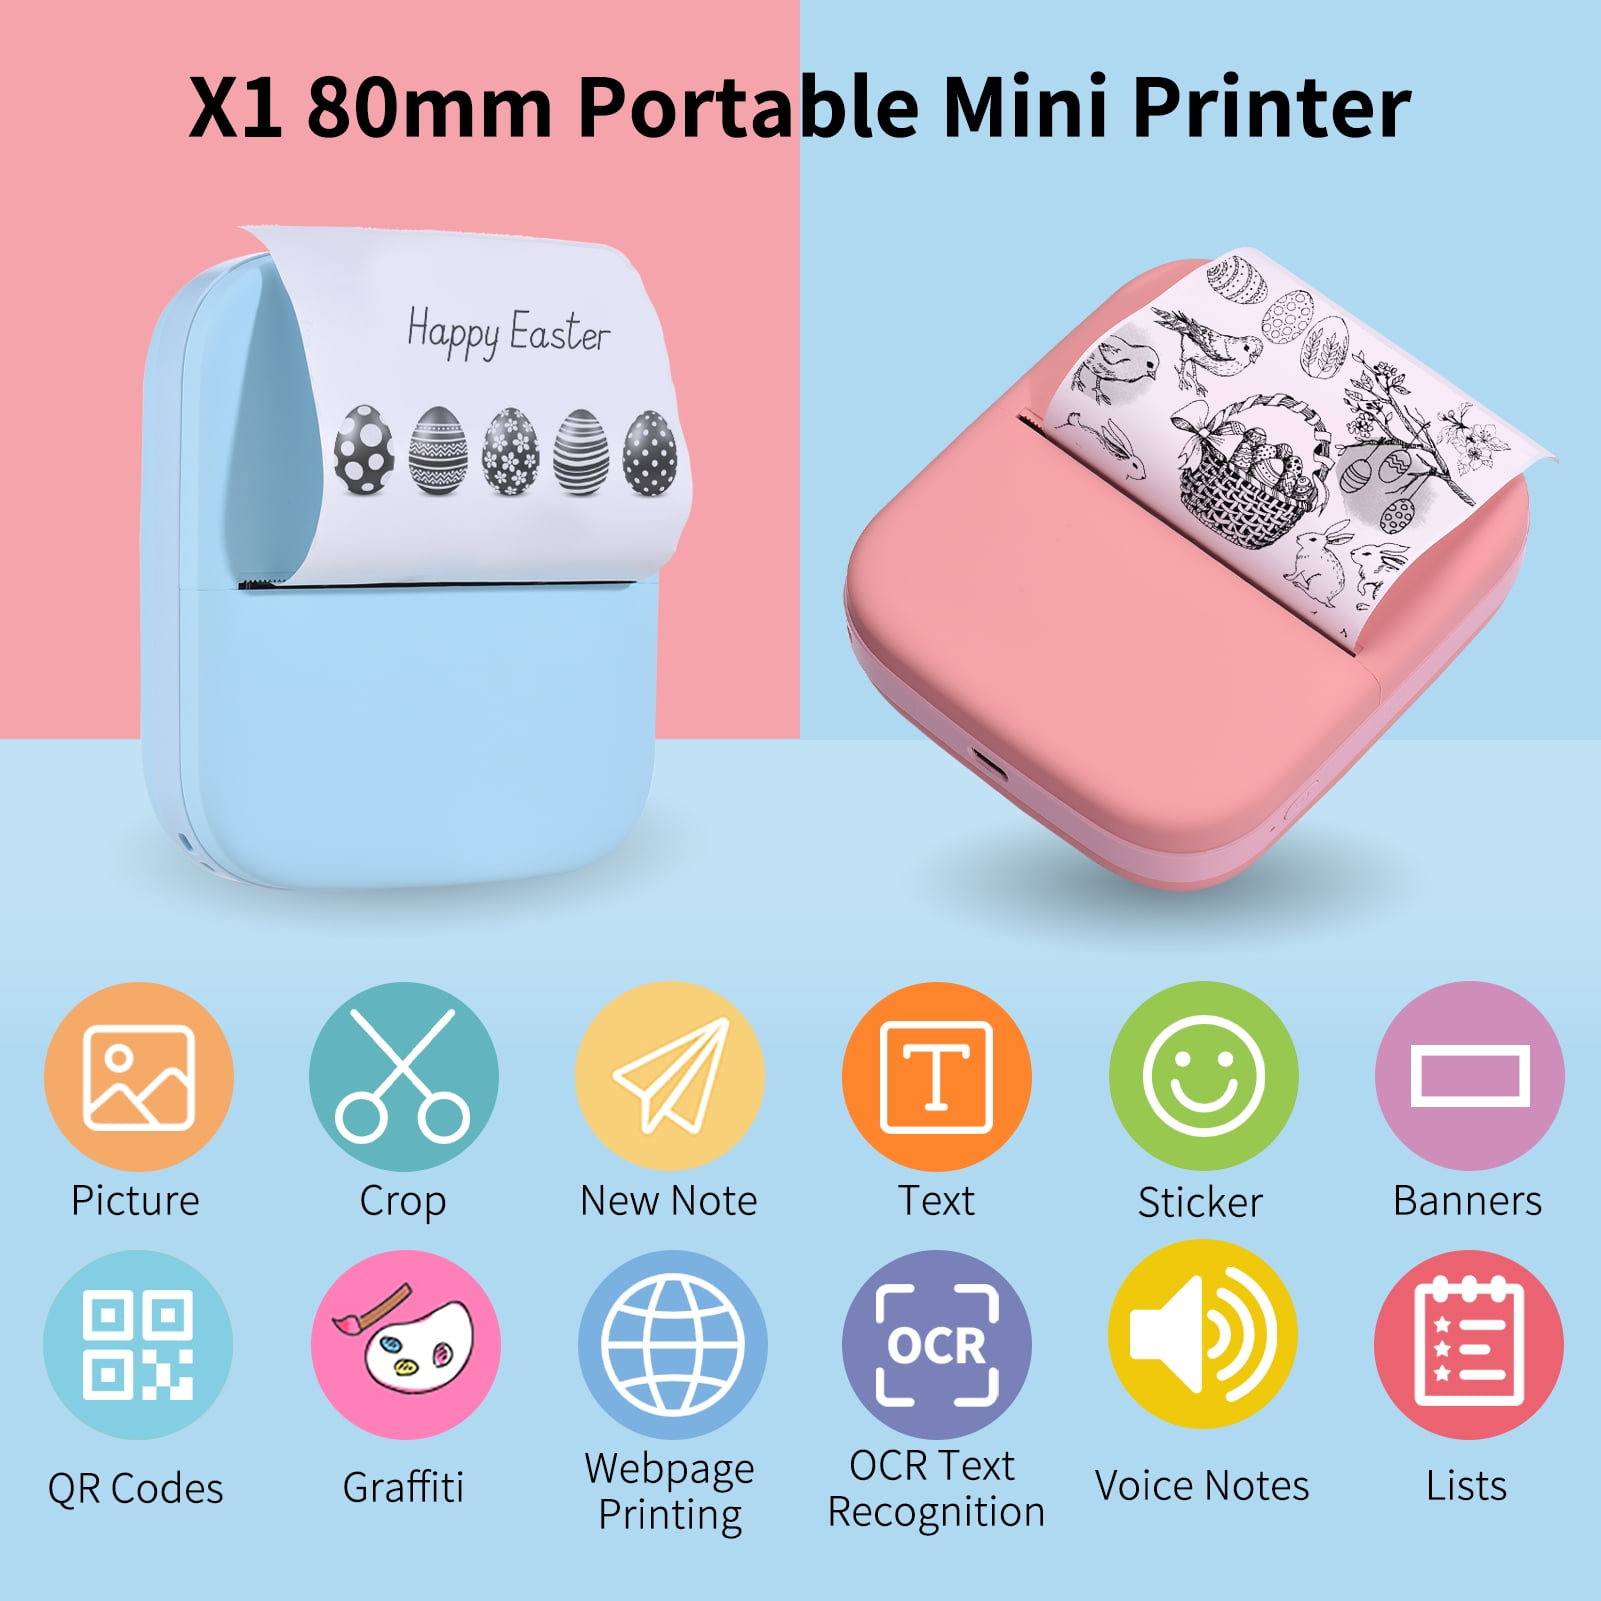 Fesjoy Mini Printer X1 Mini Pocket Printer 80mm BT Wireless Thermal Photo Printer 300dpi Picture Memo Notes Lists Journal Receipt Paper Printer Sticker Inkless Printing Compatible with Android iOS